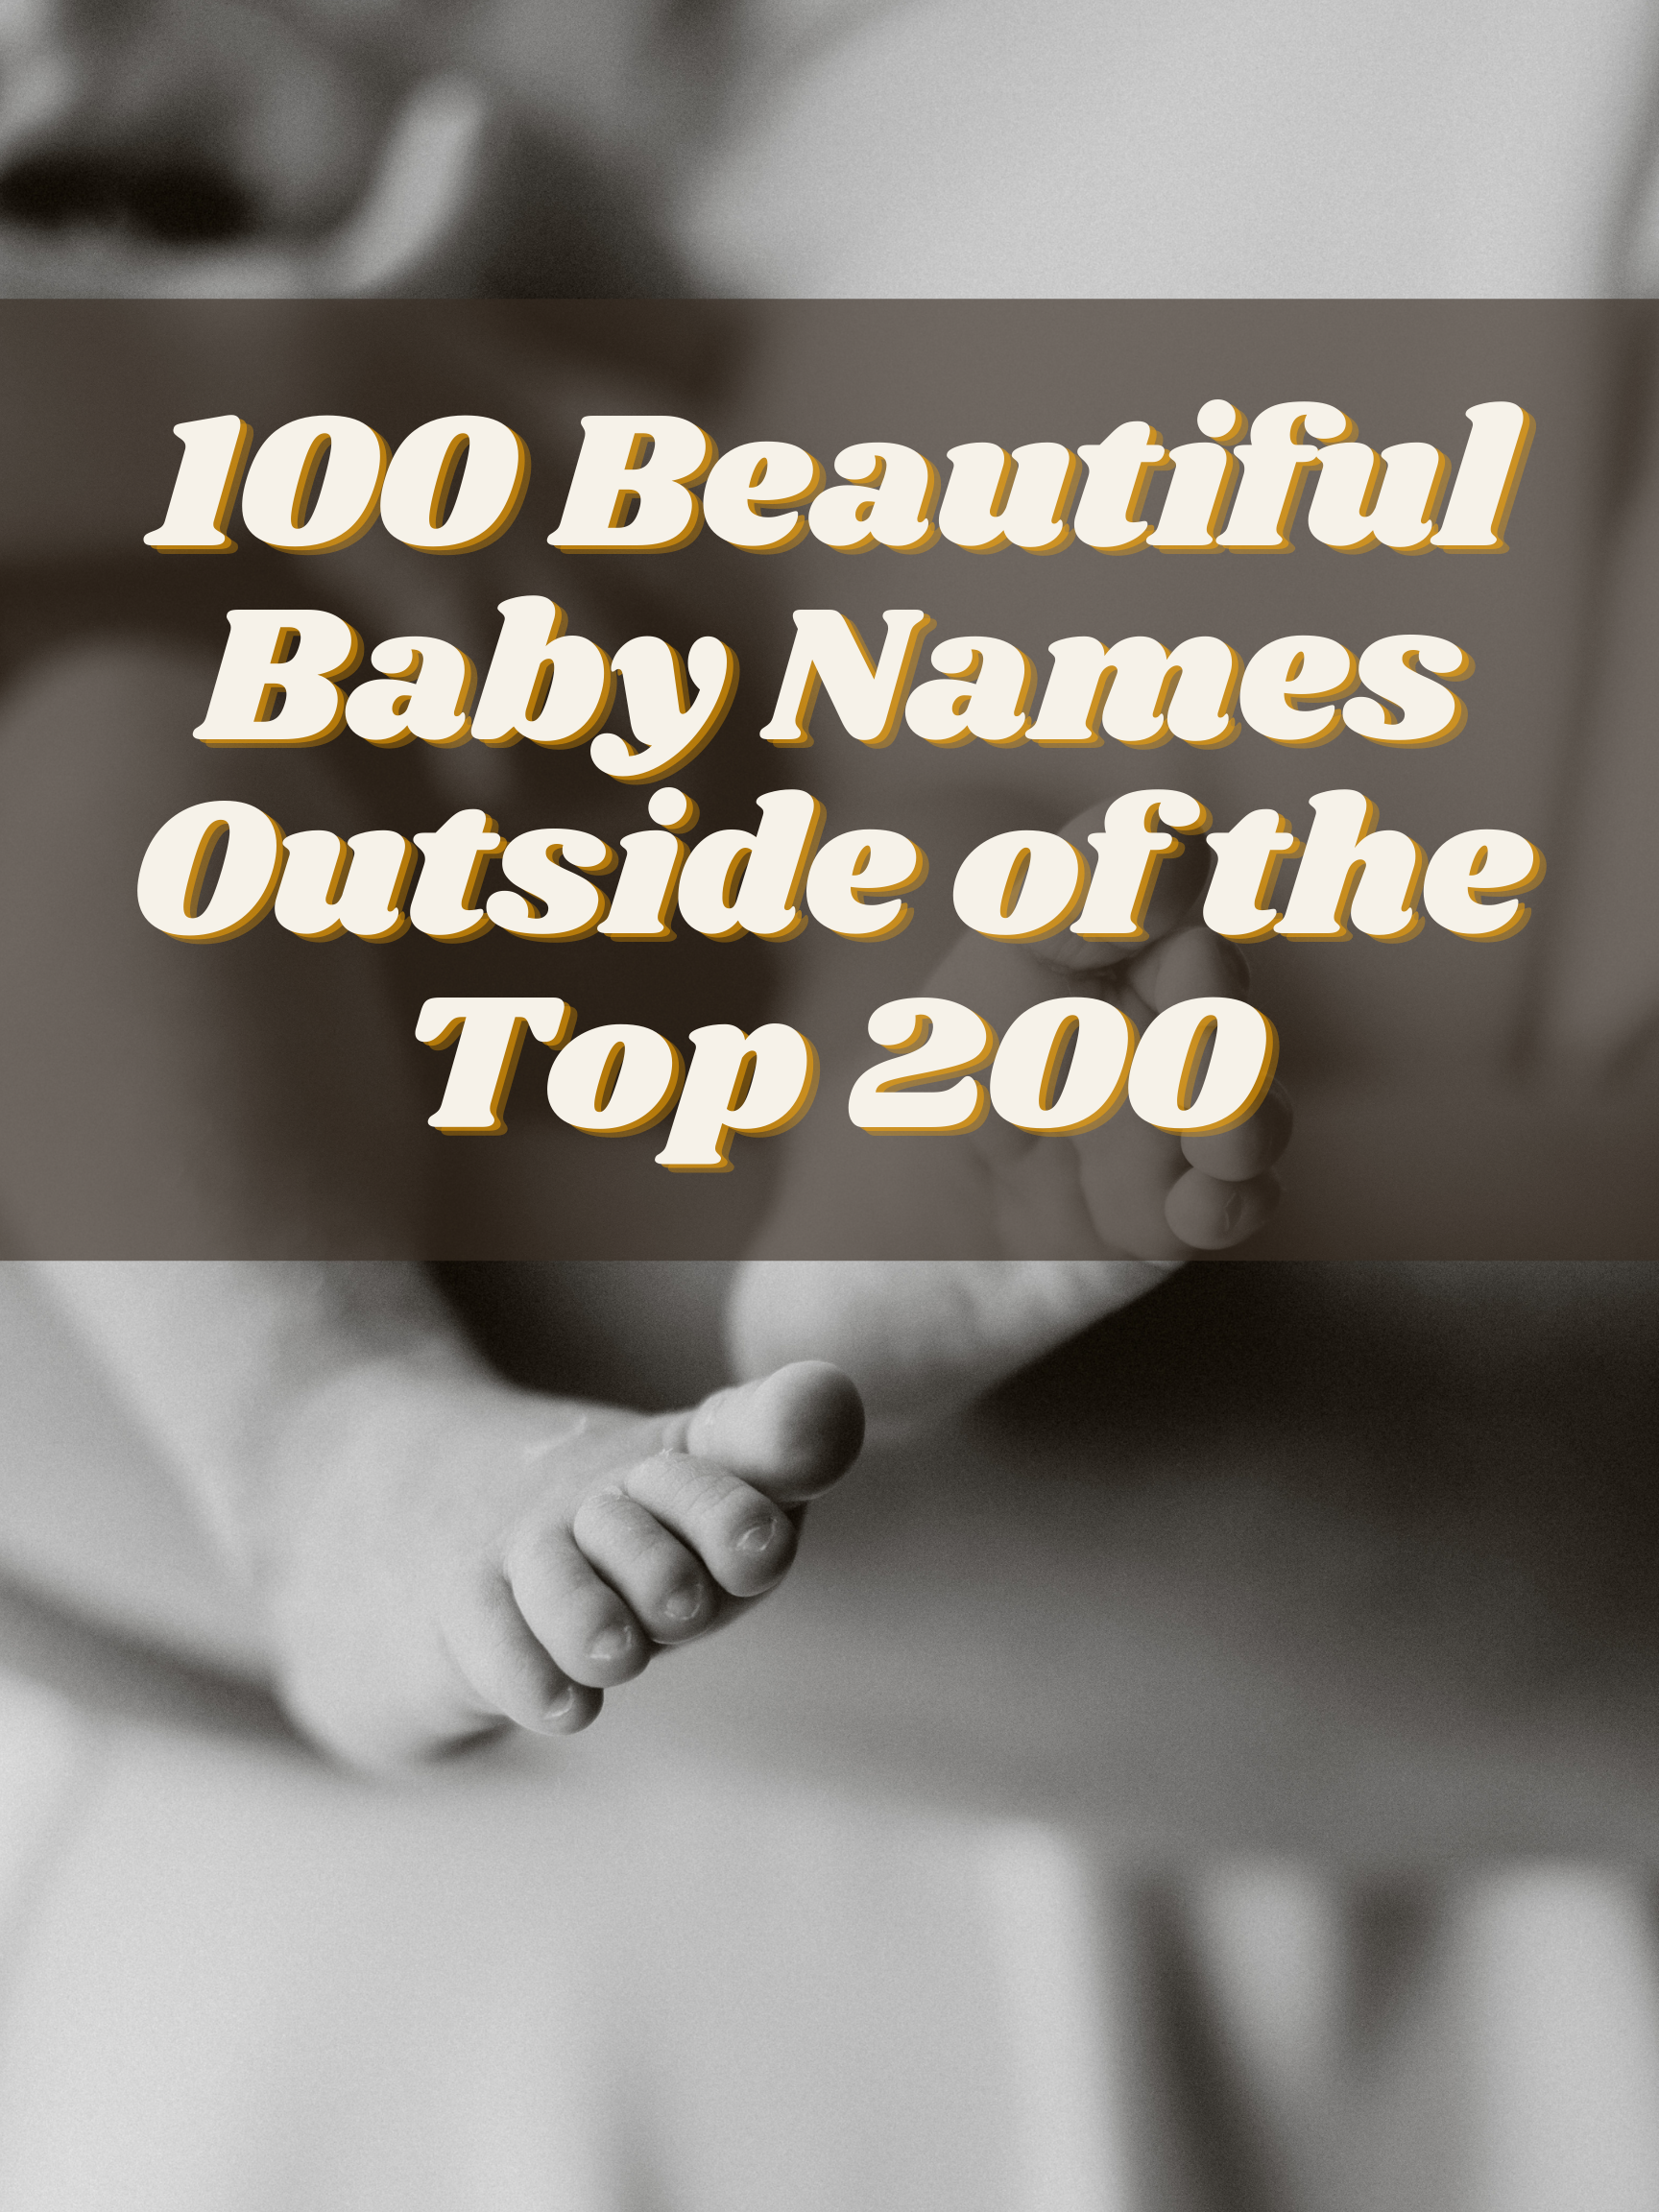 100 Beautiful Baby Names Outside of the Top 200